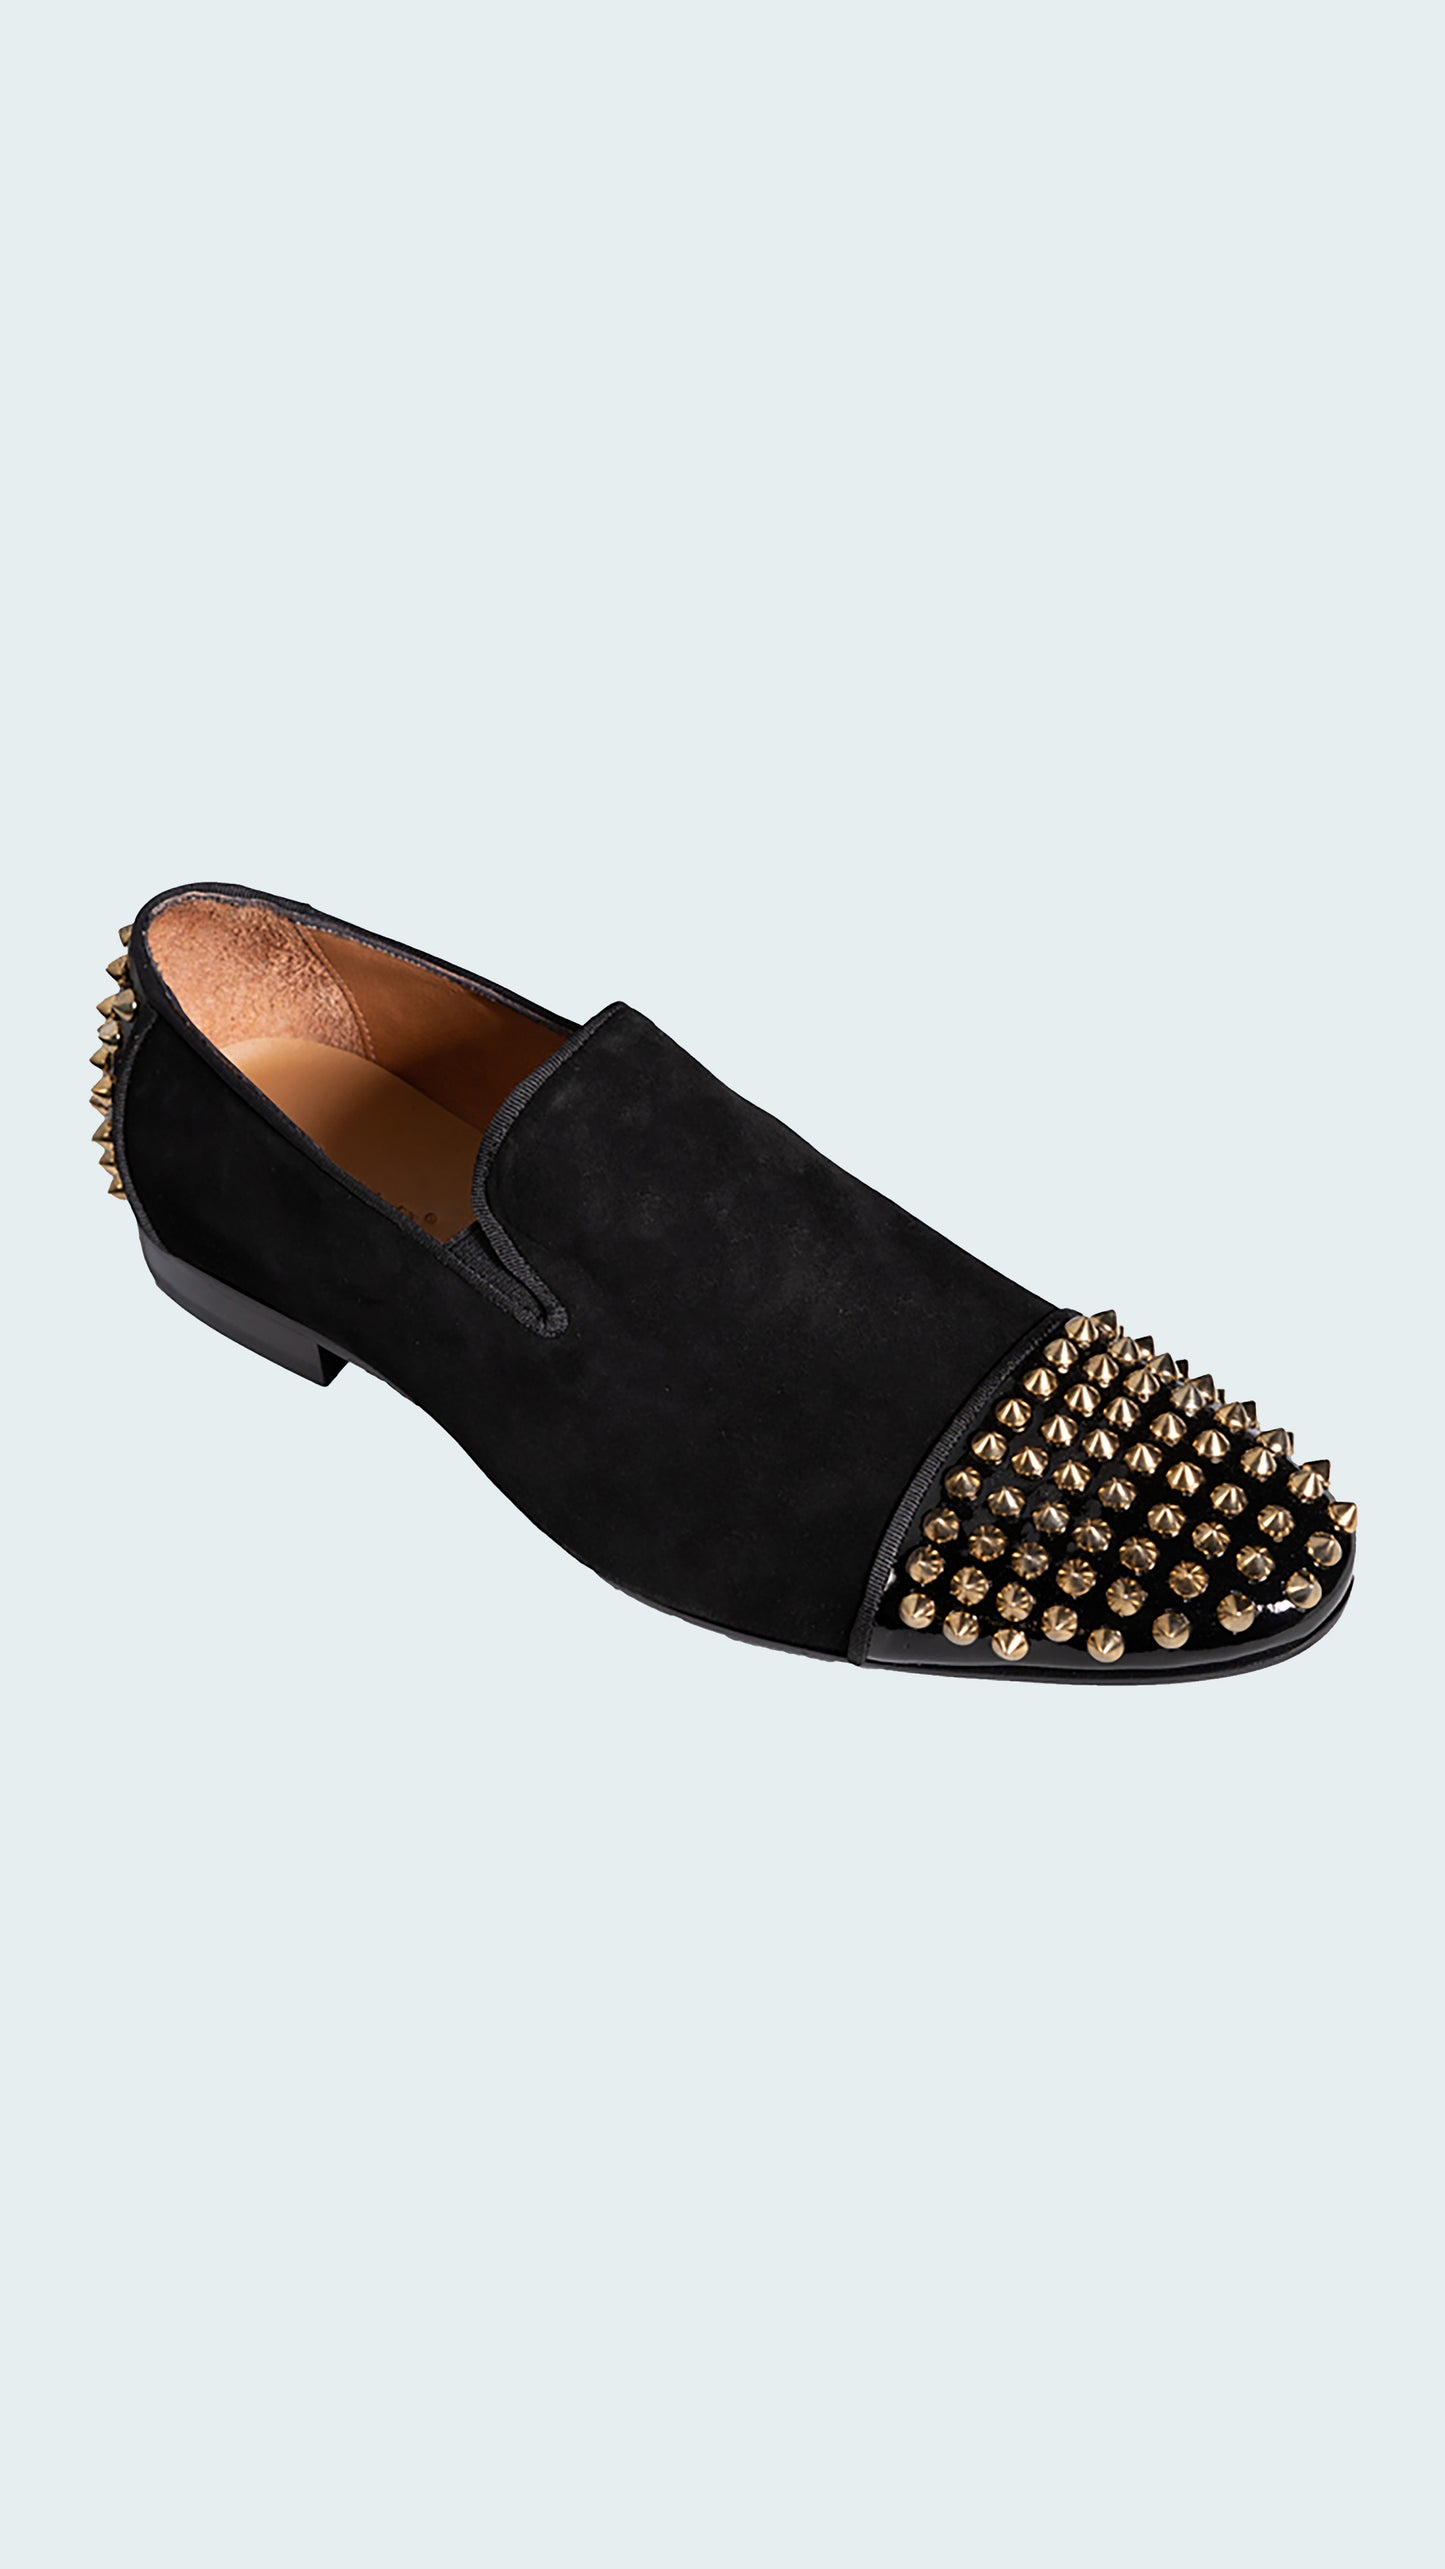 Men's Black Suede Loafers with Bold Gold Spiked Embellishments by Vercini